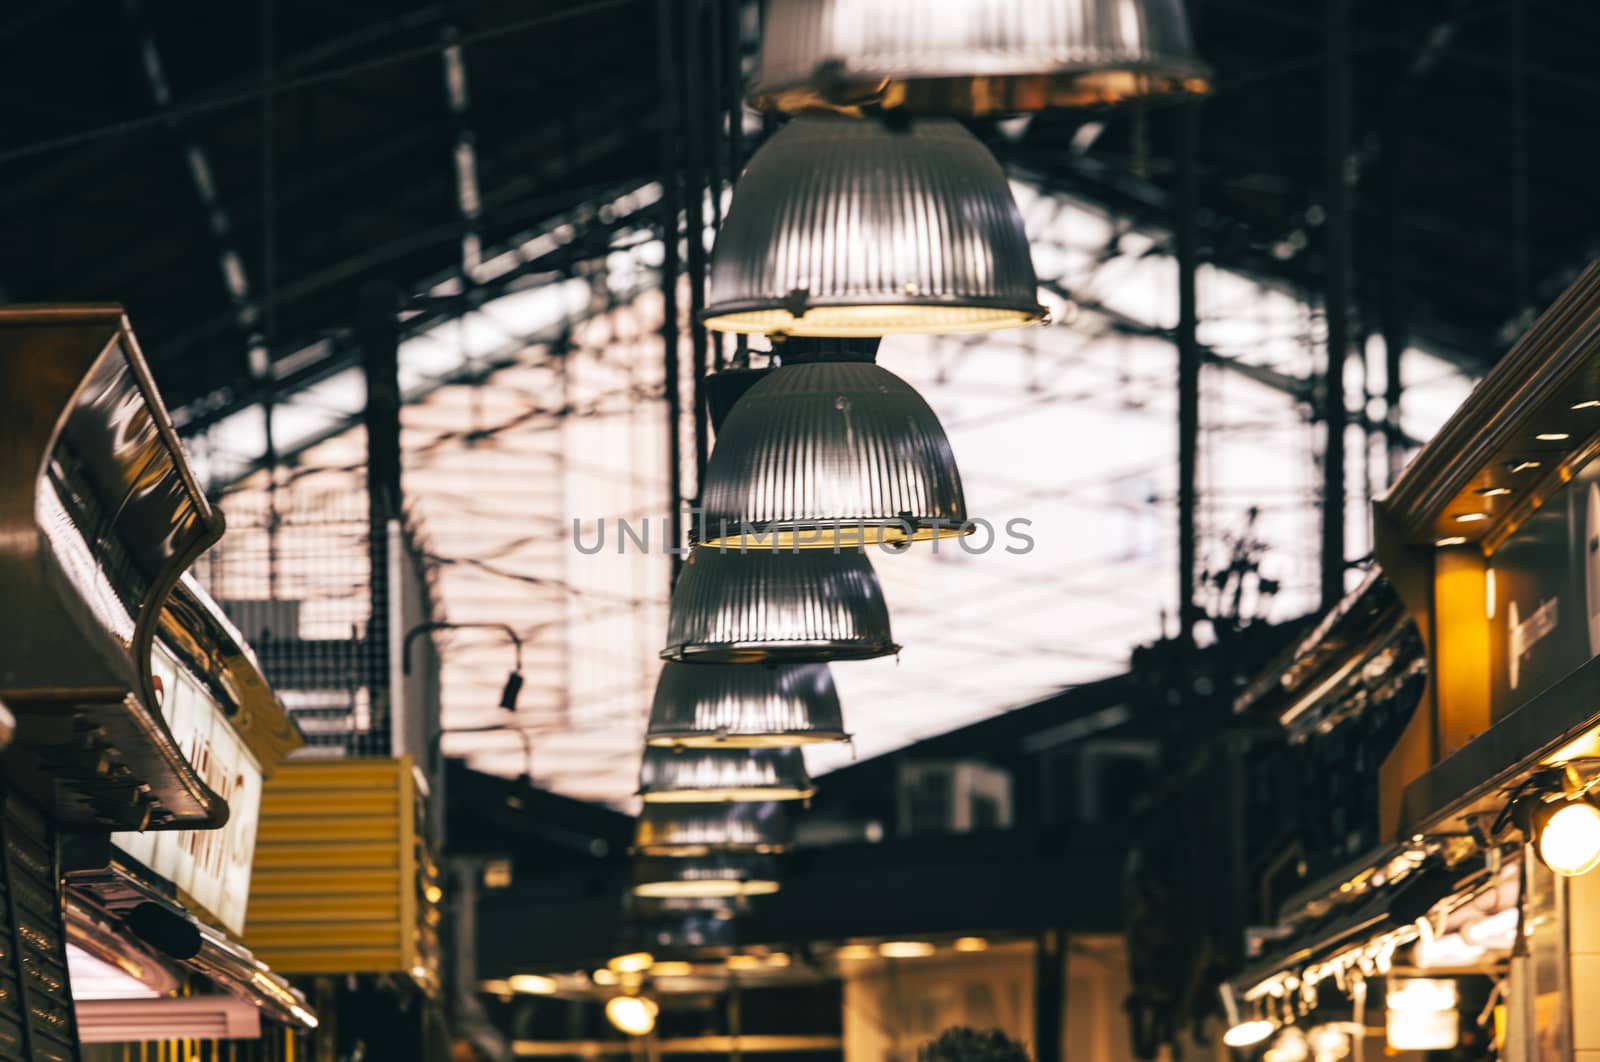 Lights sited in the Boqueria market